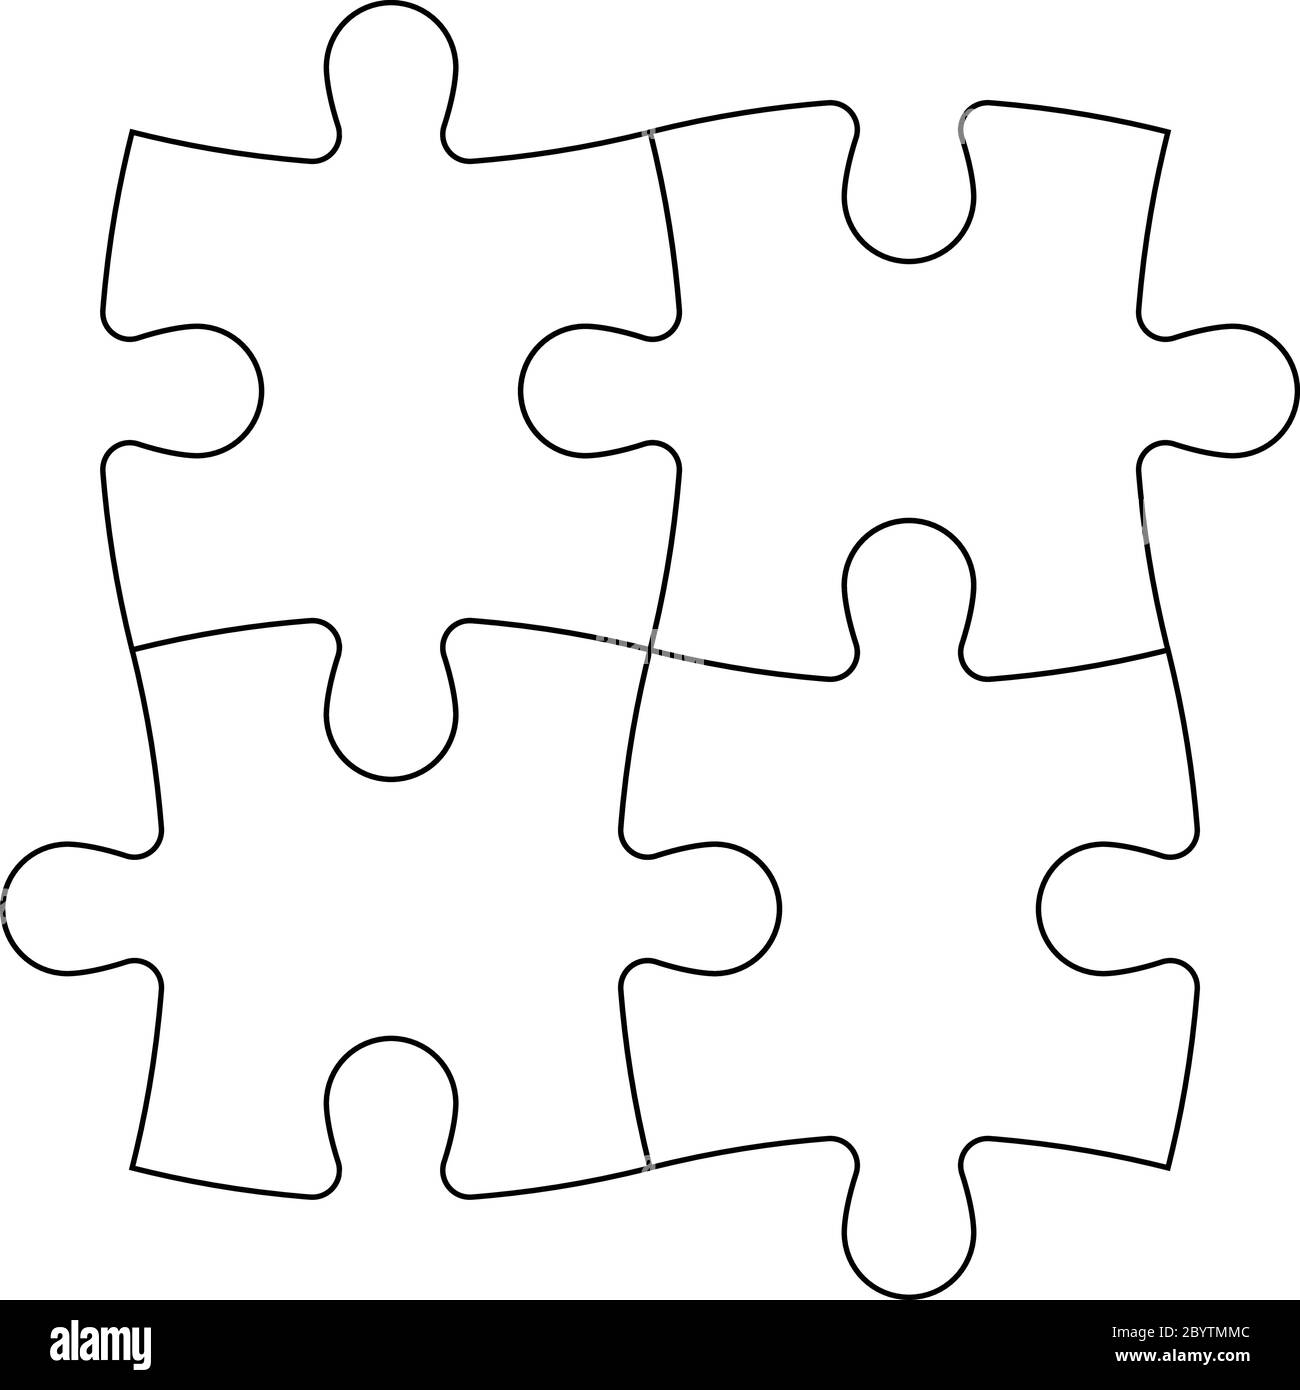 Jigsaw Piece Fit Black and White Stock Photos & Images - Alamy